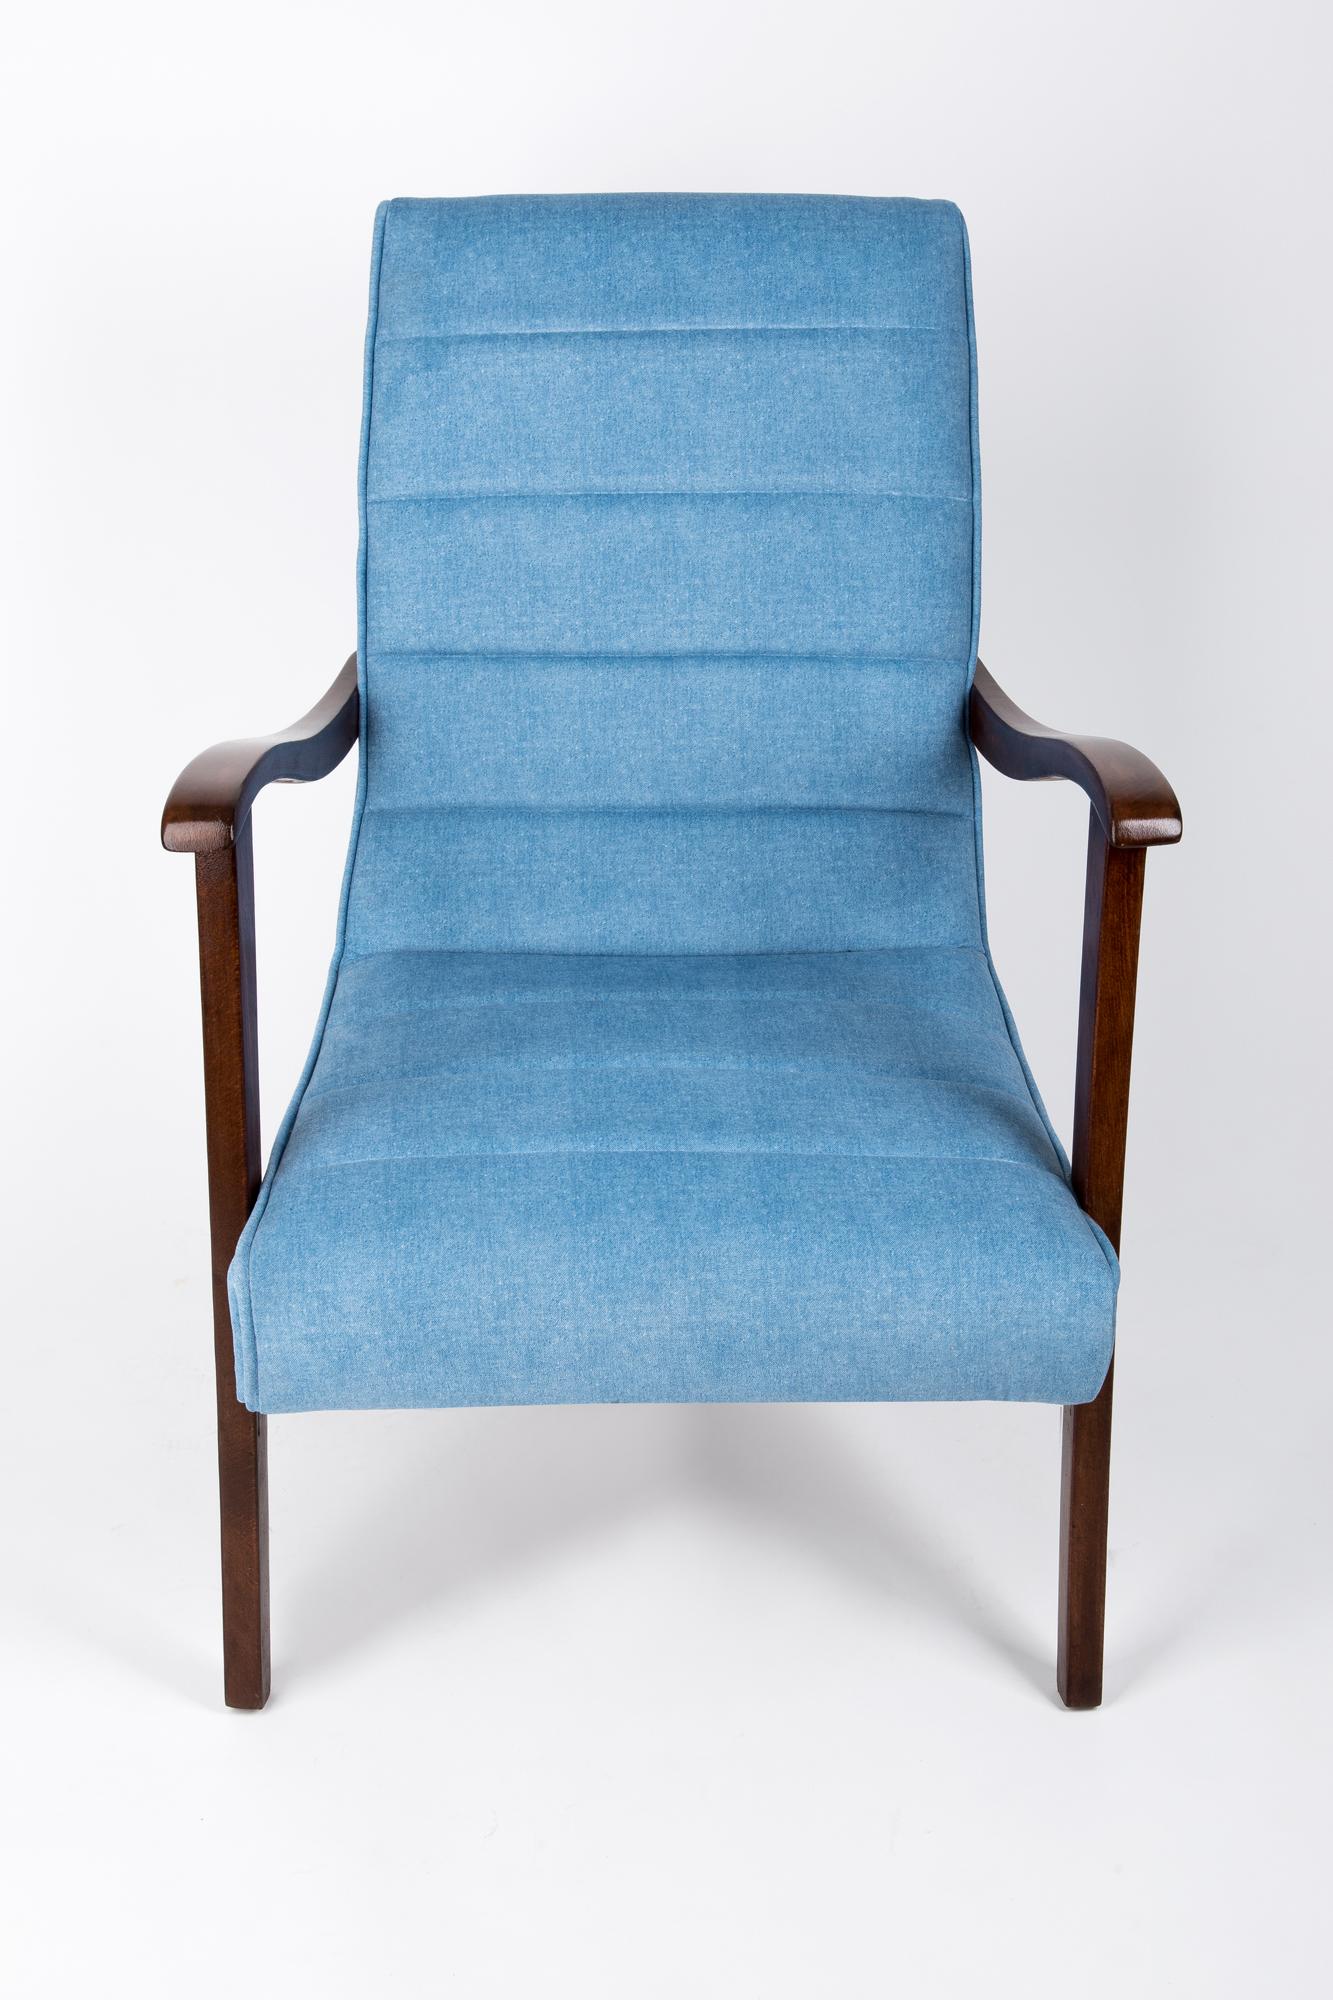 20th Century Mid-Century Modern Blue Armchair by Prudnik Furniture Factory, Poland, 1960s For Sale